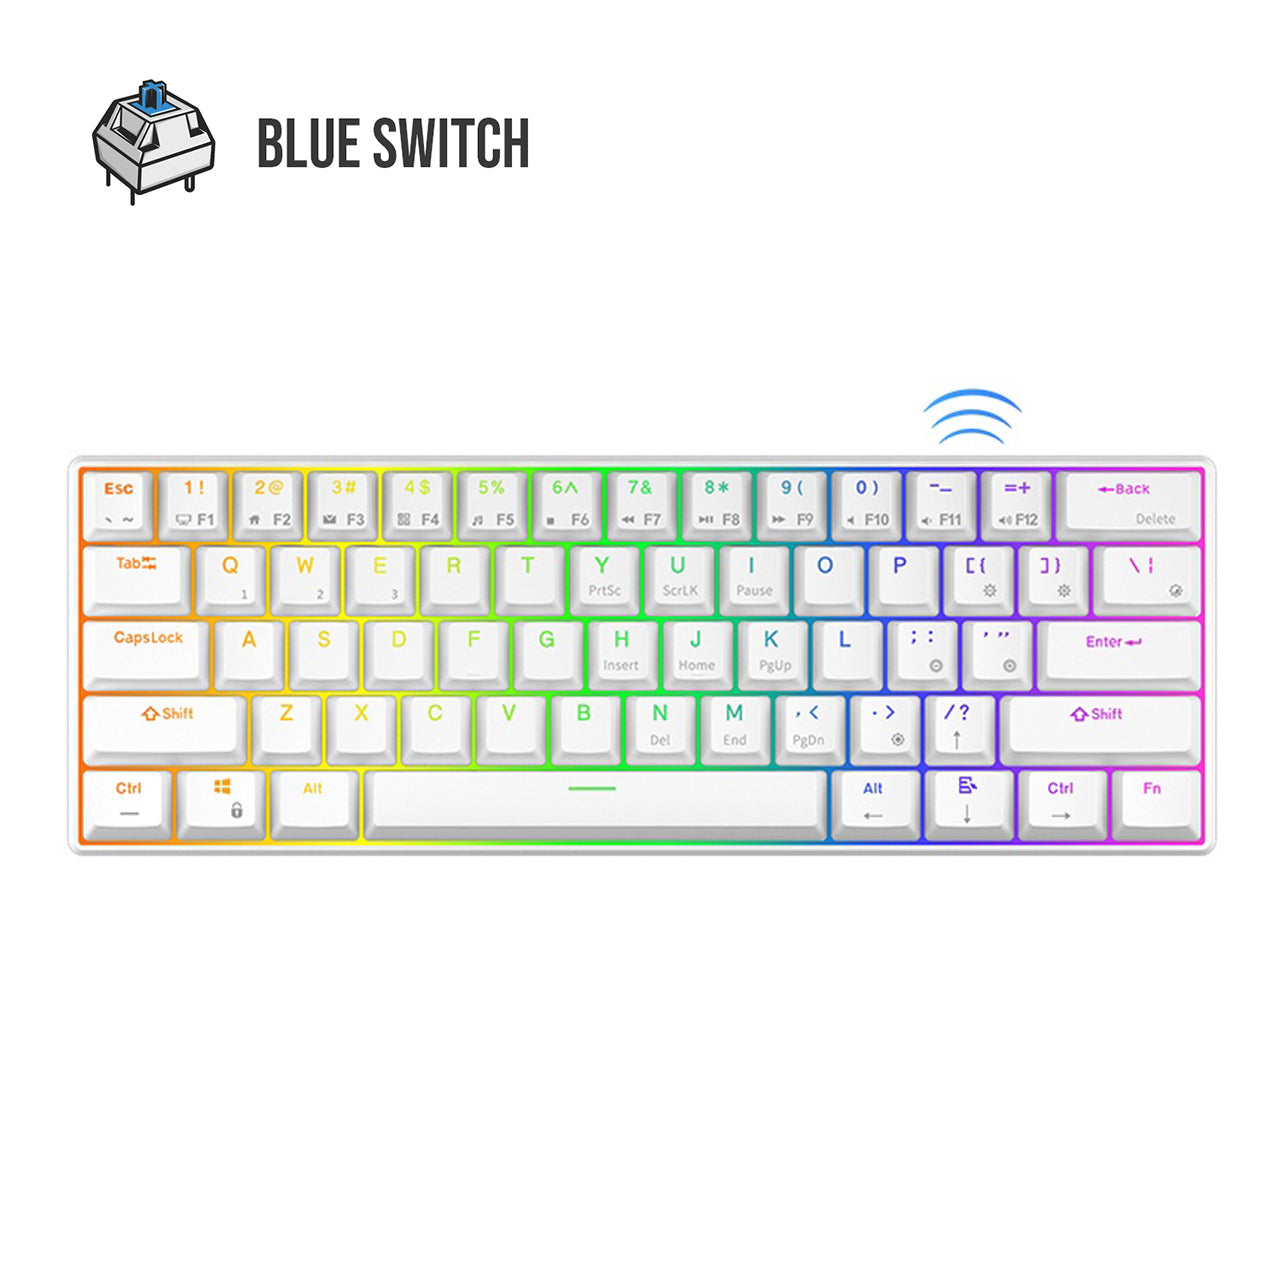 Royal Kludge RK RK61 RGB 61 Keys Mechanical Gaming Keyboard 2.4G Wireless Wired Hot Swappable with Bluetooth 5.0 (White, Black) (Available in Blue Clicky, Red Linear, and Brown Tactile Switch)